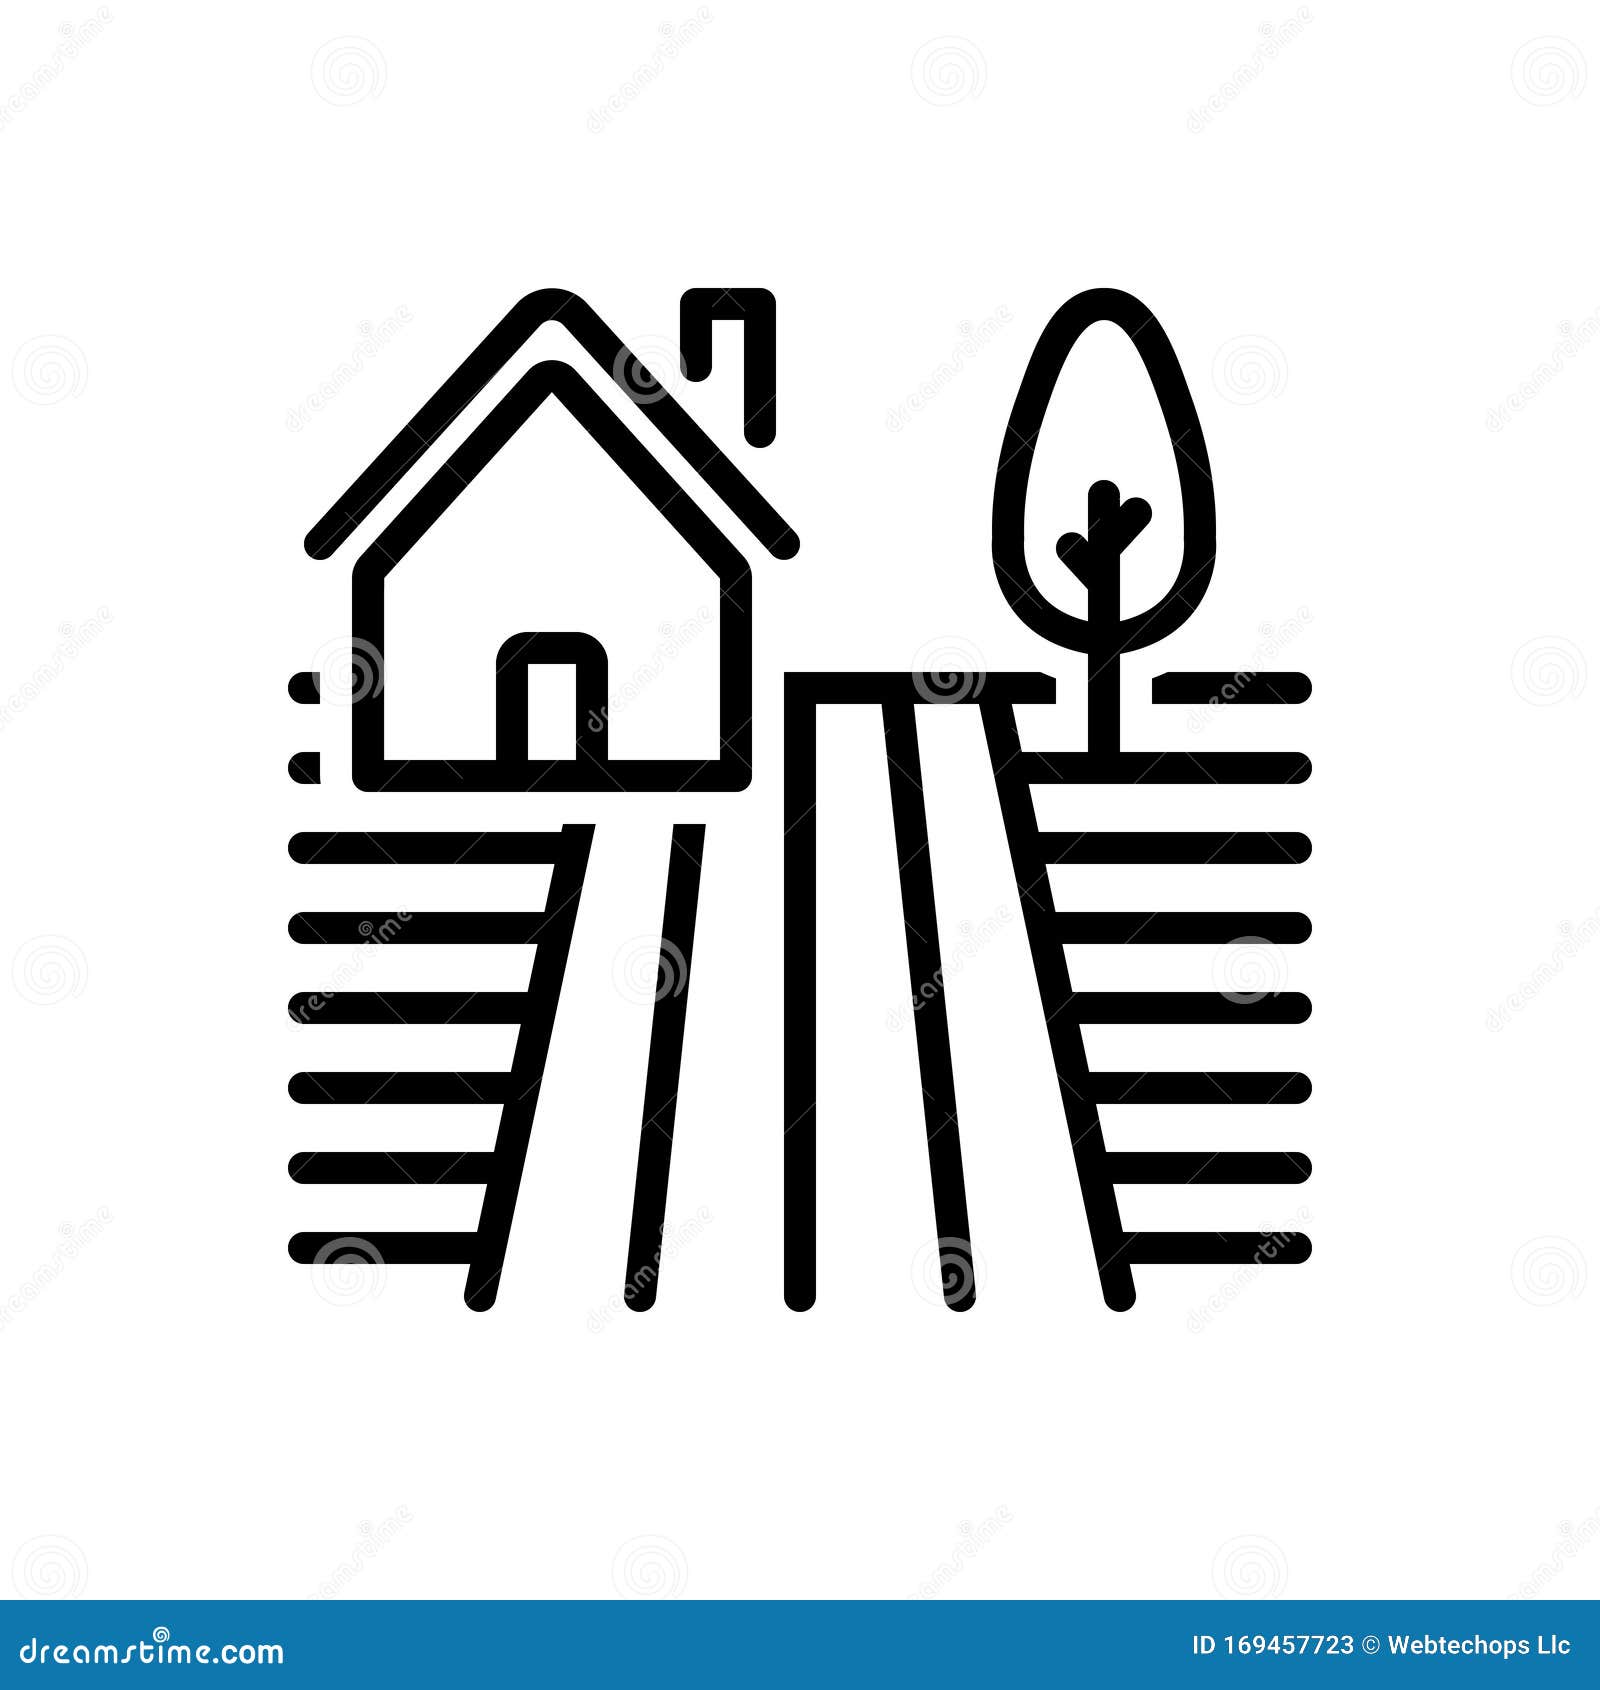 black line icon for farm, land and ground